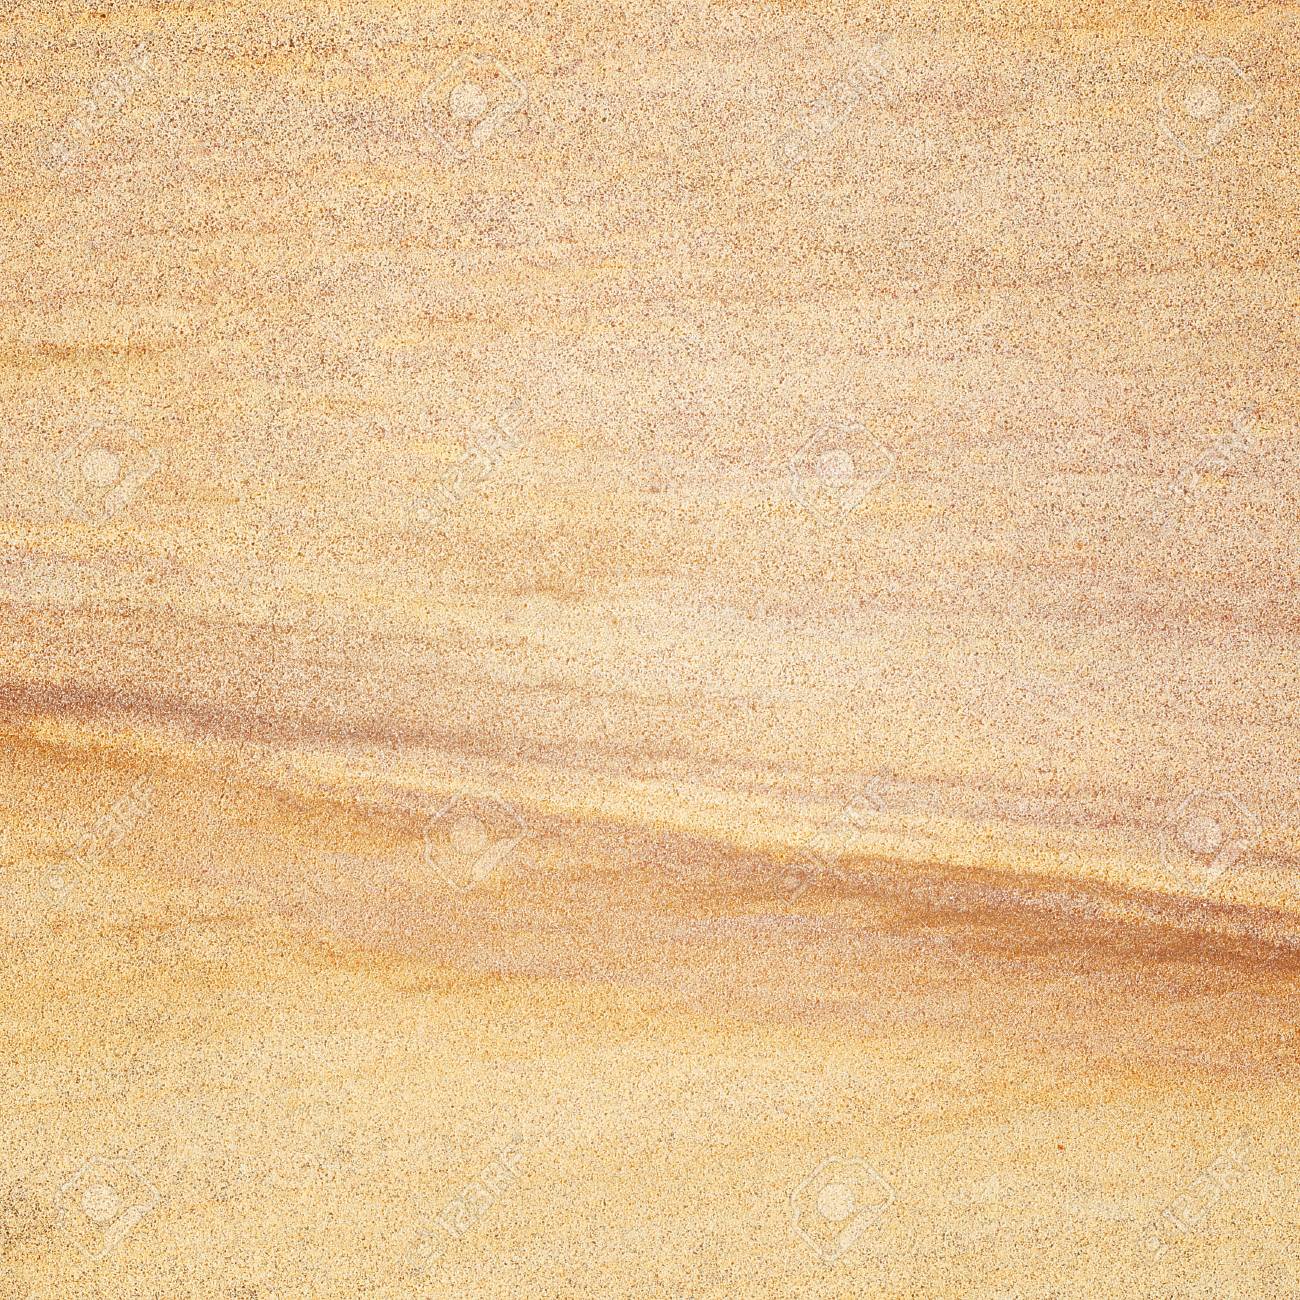 Sandstone Background Stock Photo Picture And Royalty Free Image